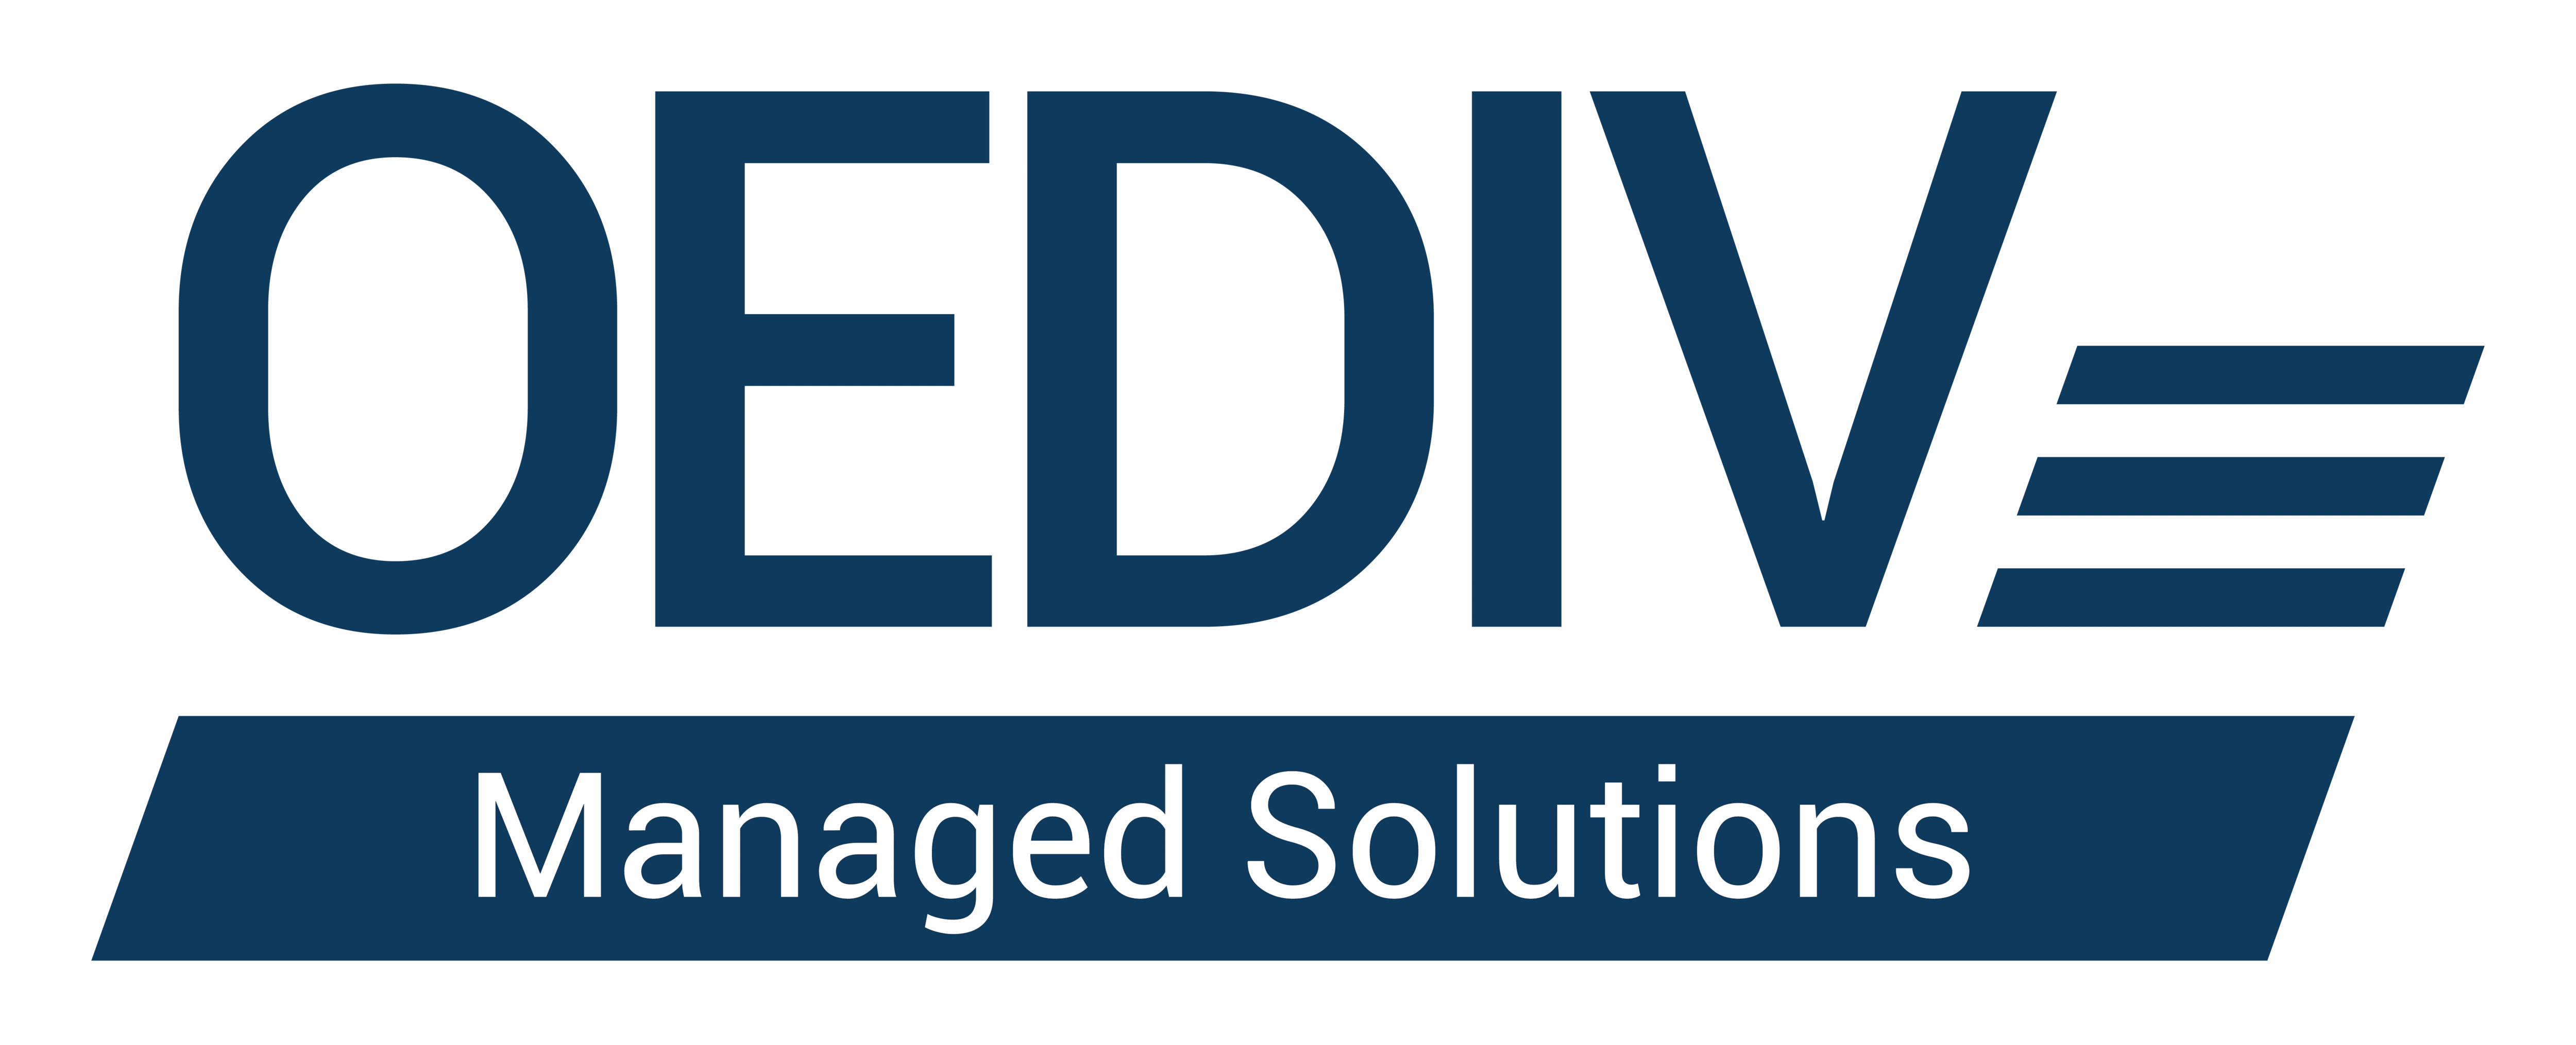 OEDIV Managed Solutions logo